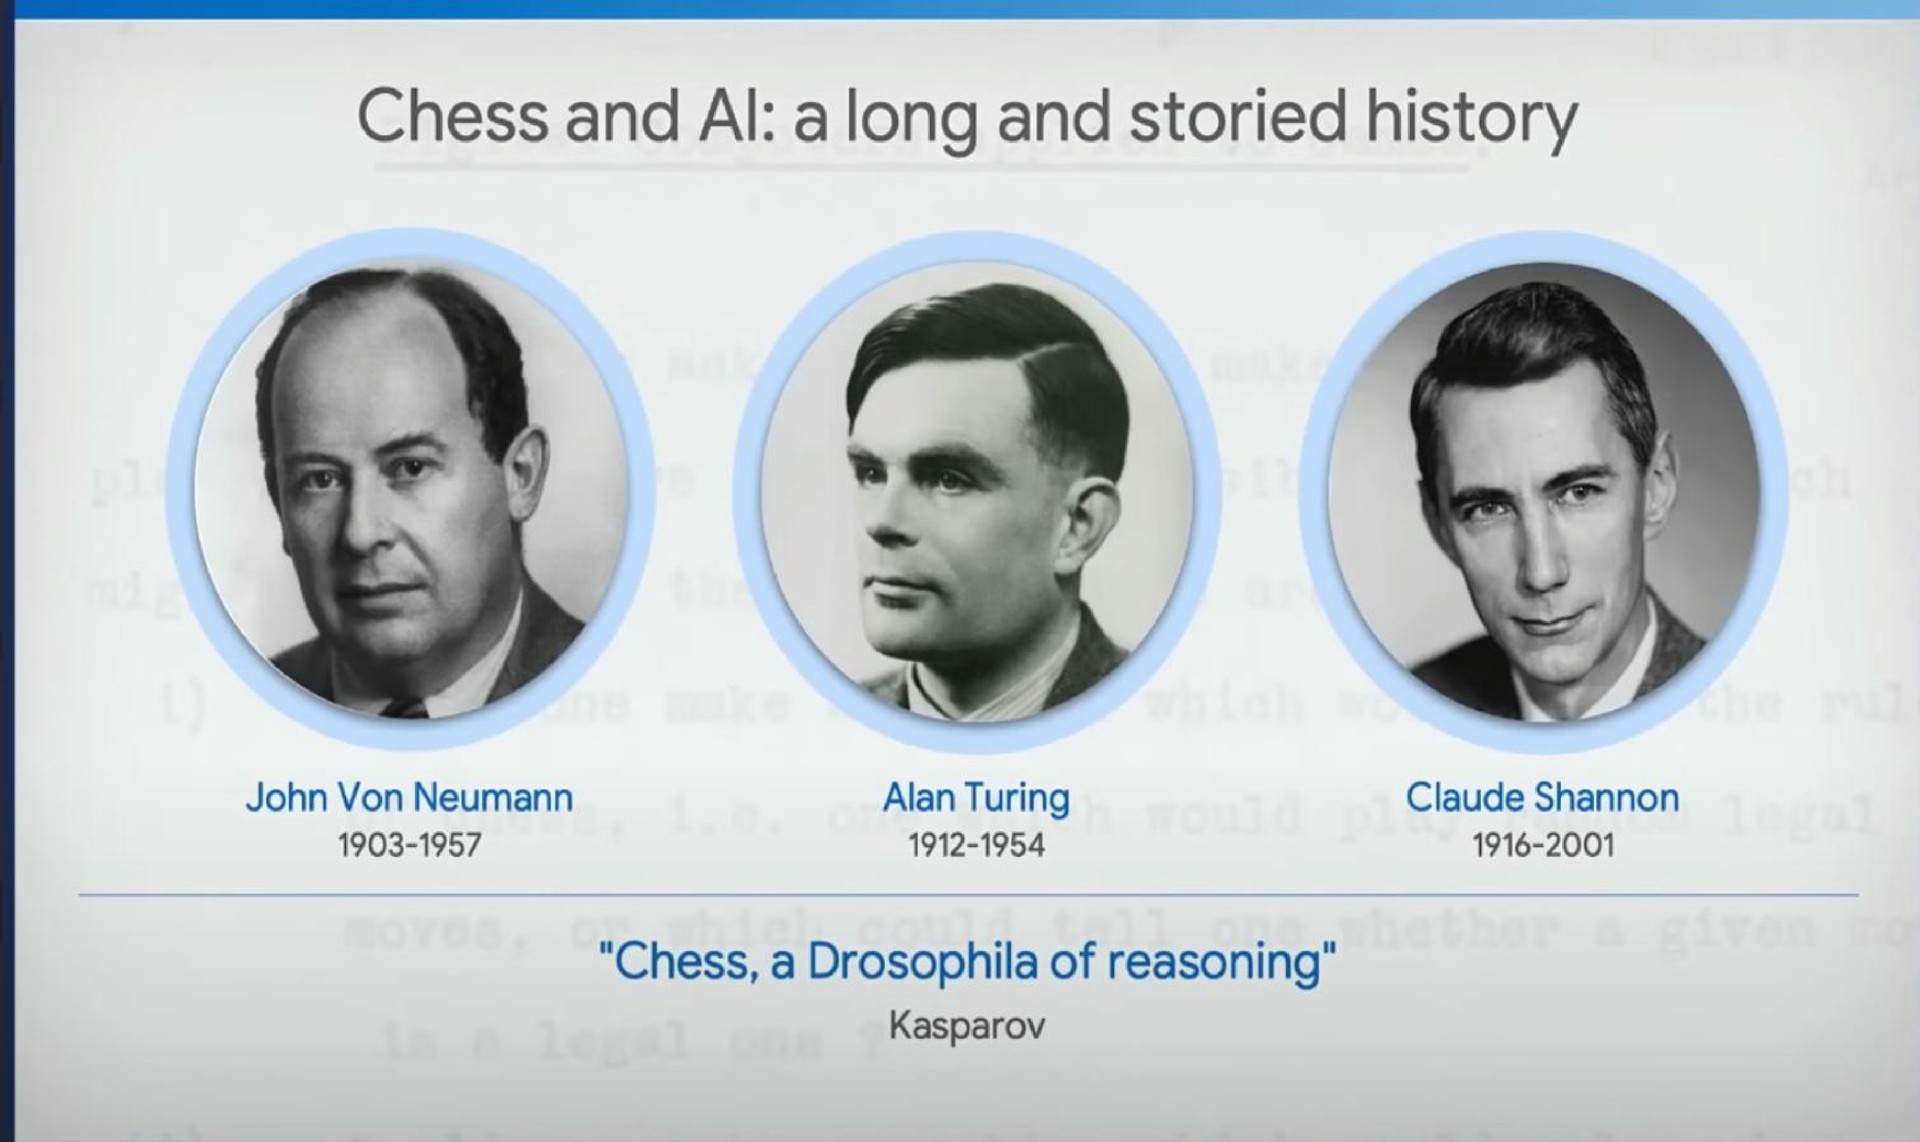 chess and a long and storied history | DeepMind